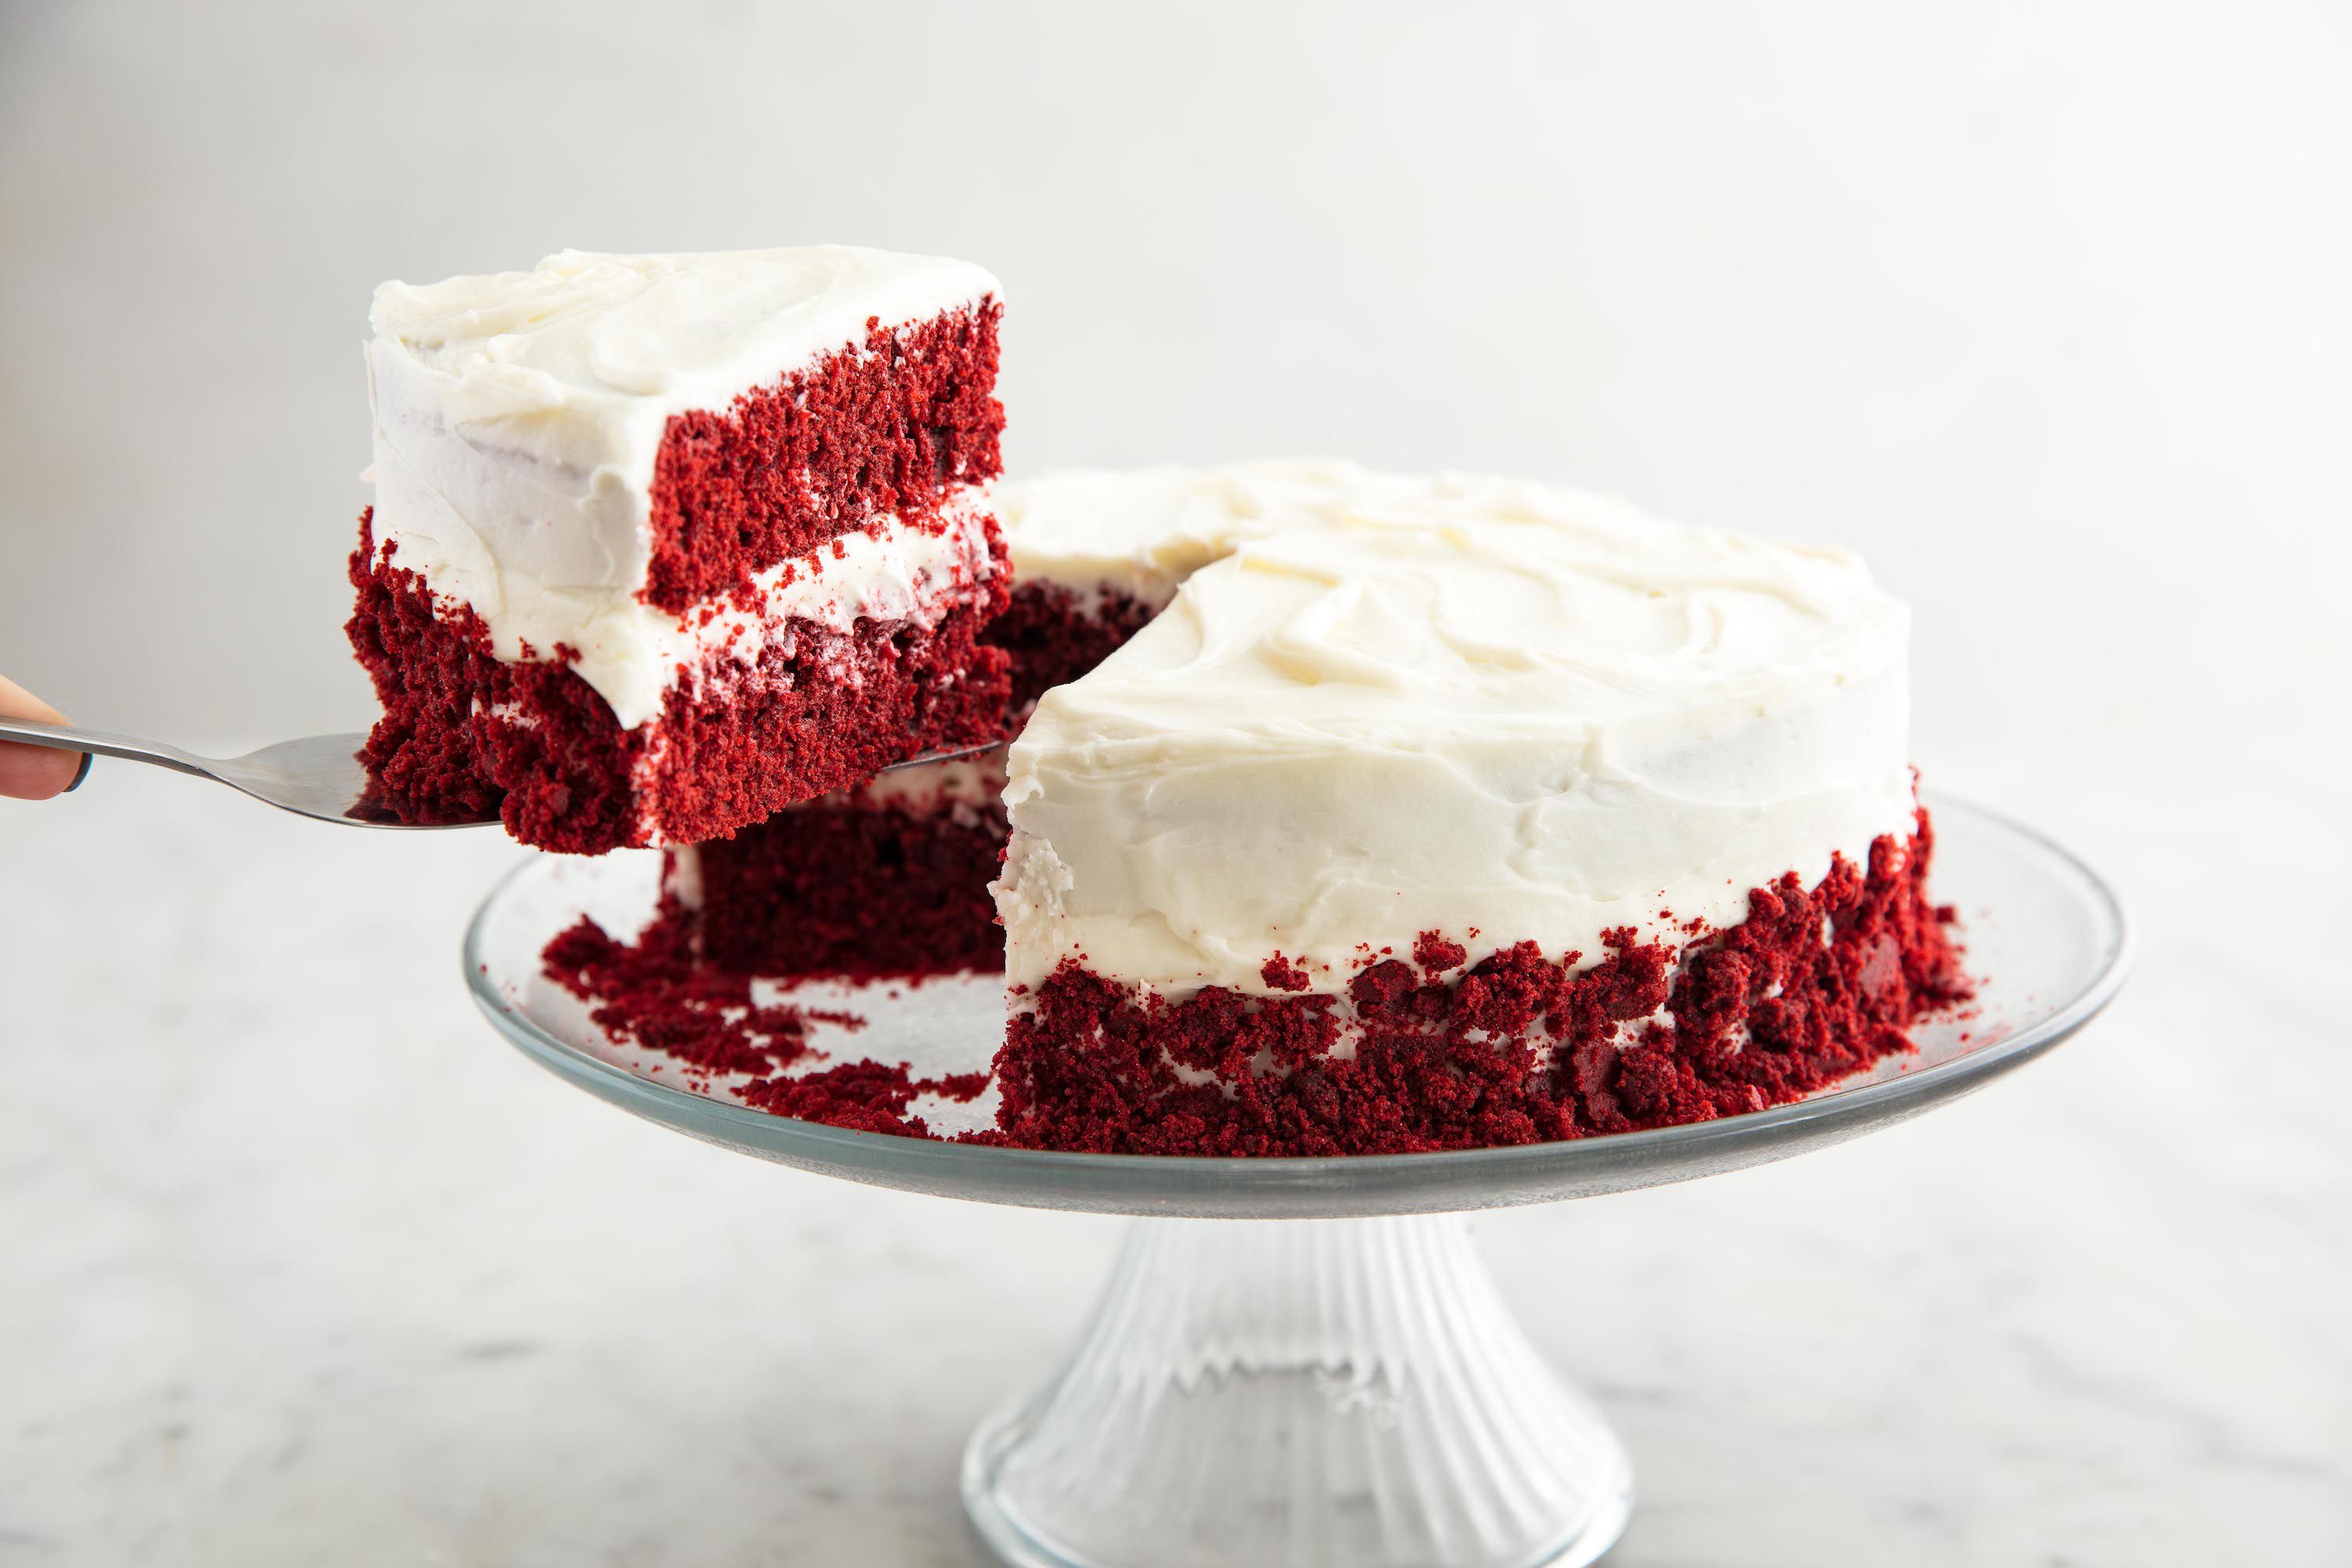 What gives red velvet cake its distinctive flavor? - Quora